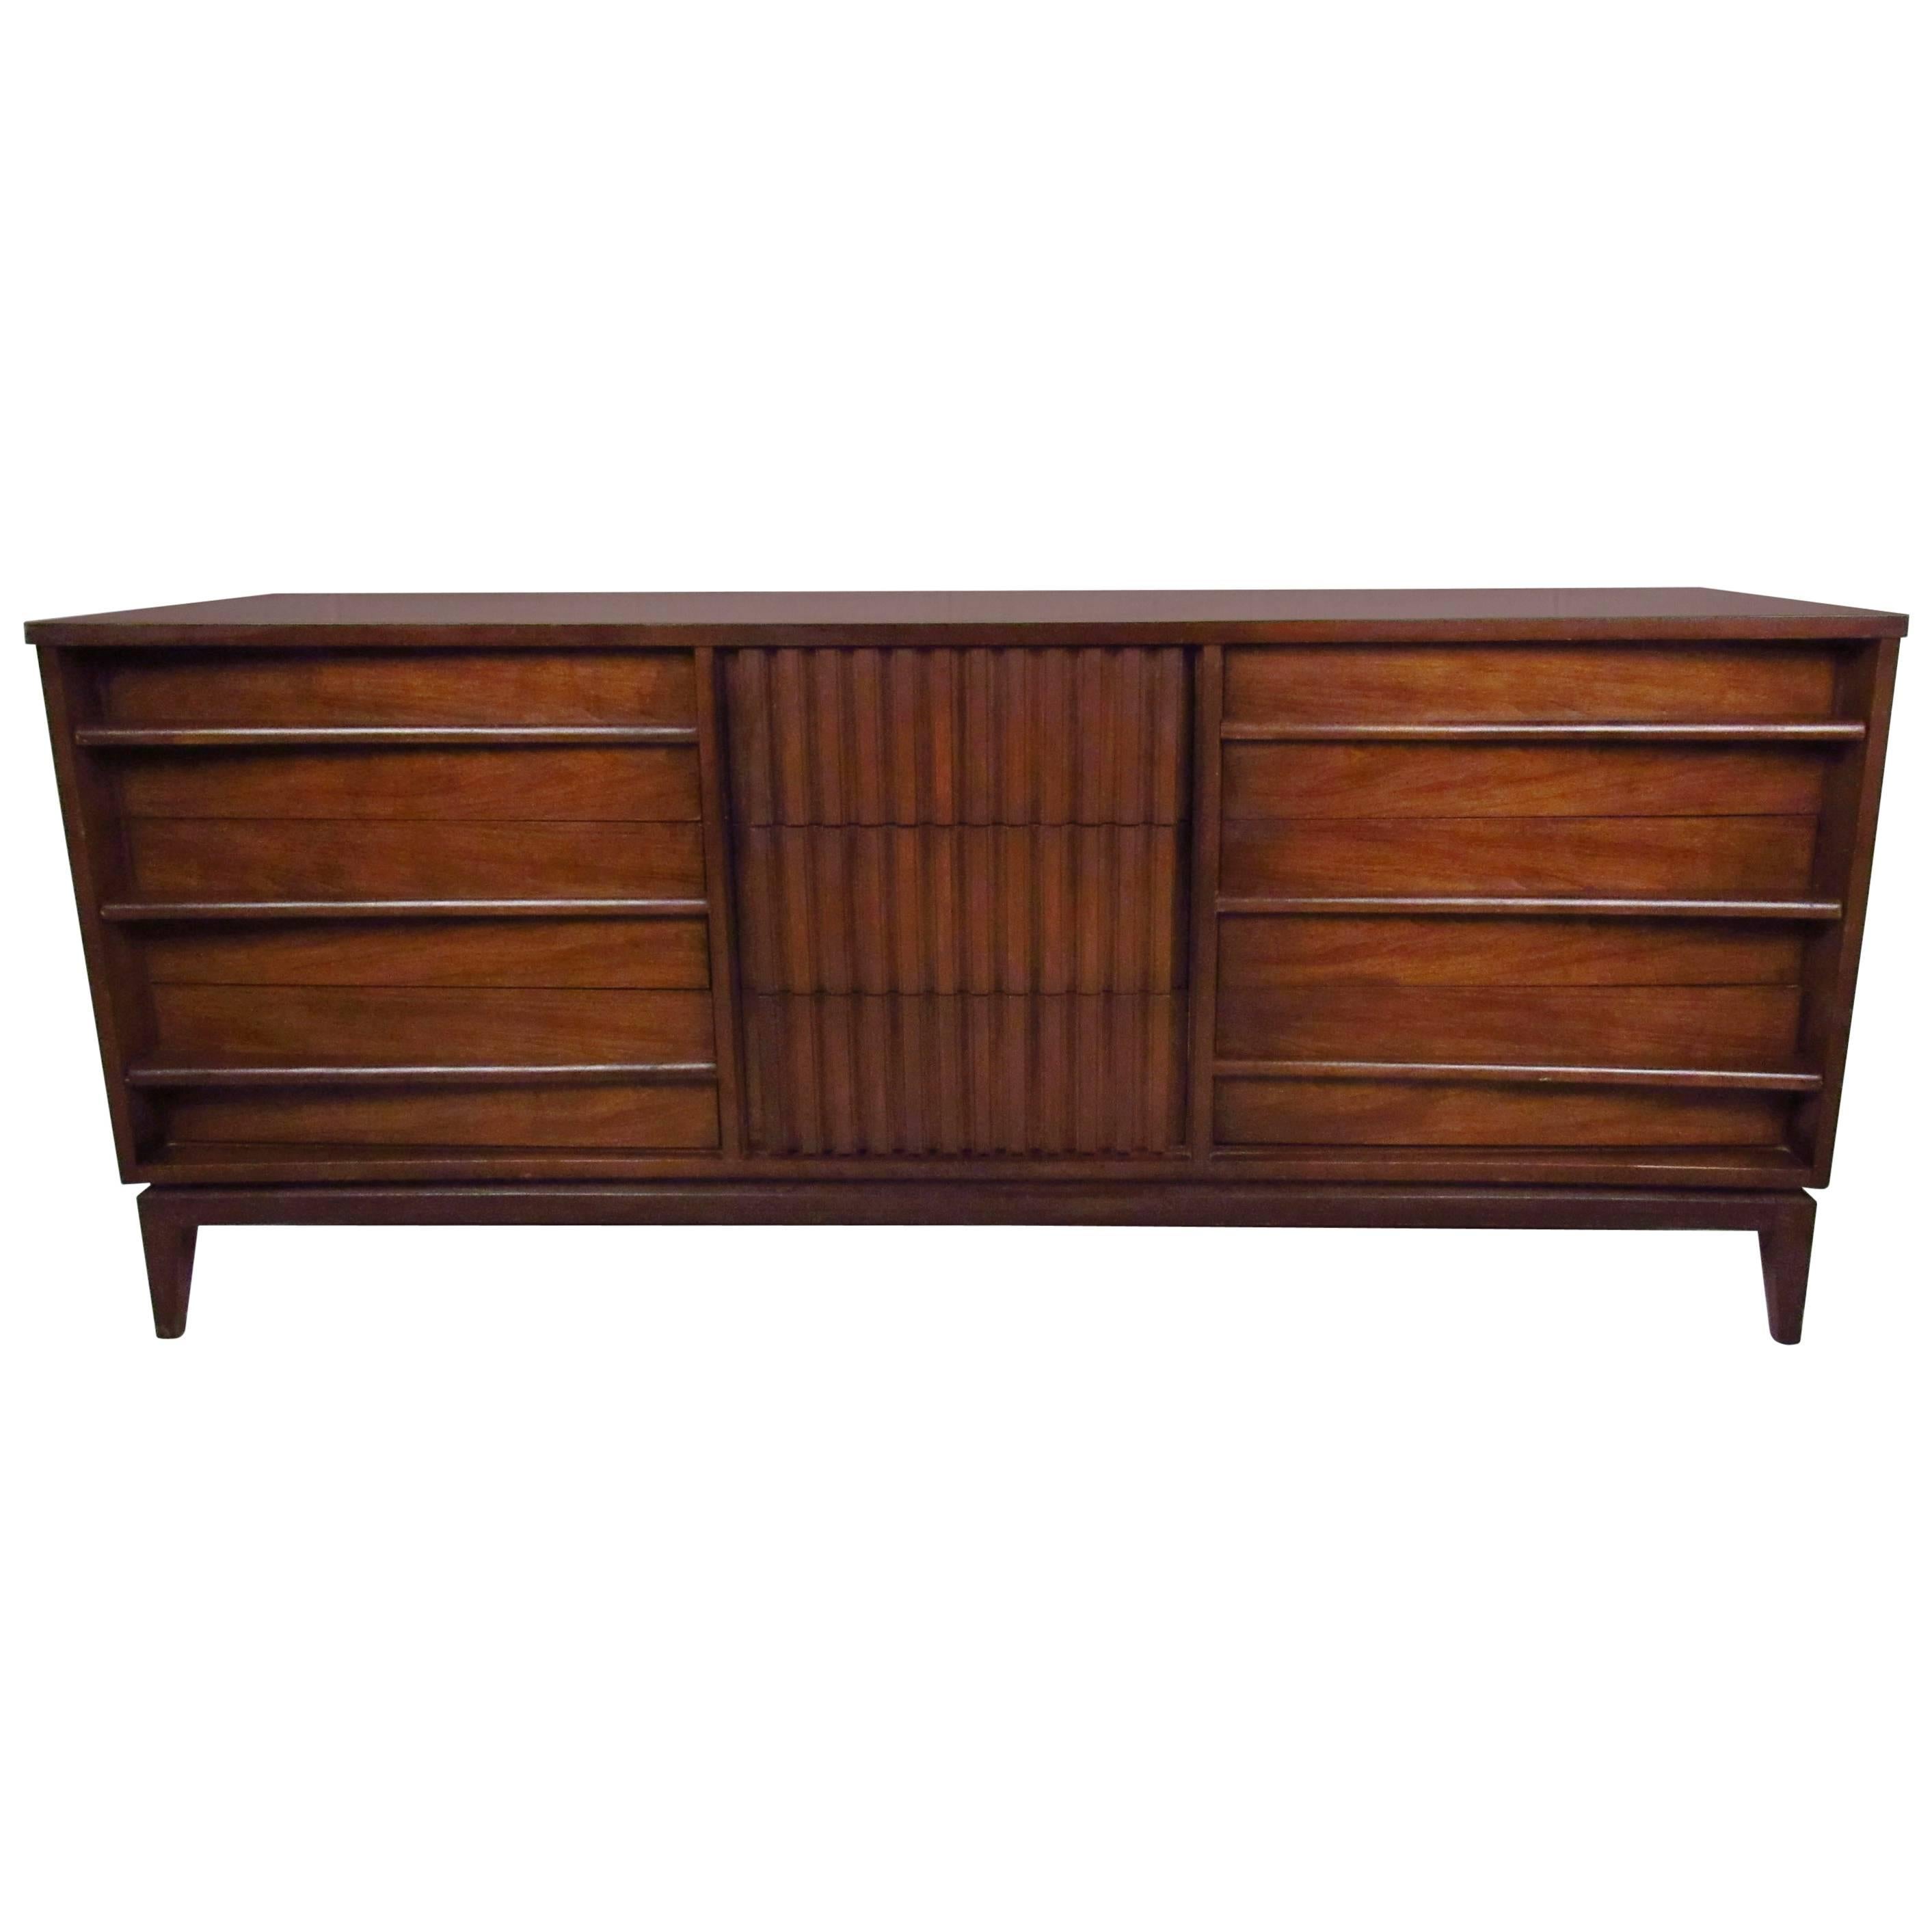 Mid-century Modern American-Made Louvered Front Dresser